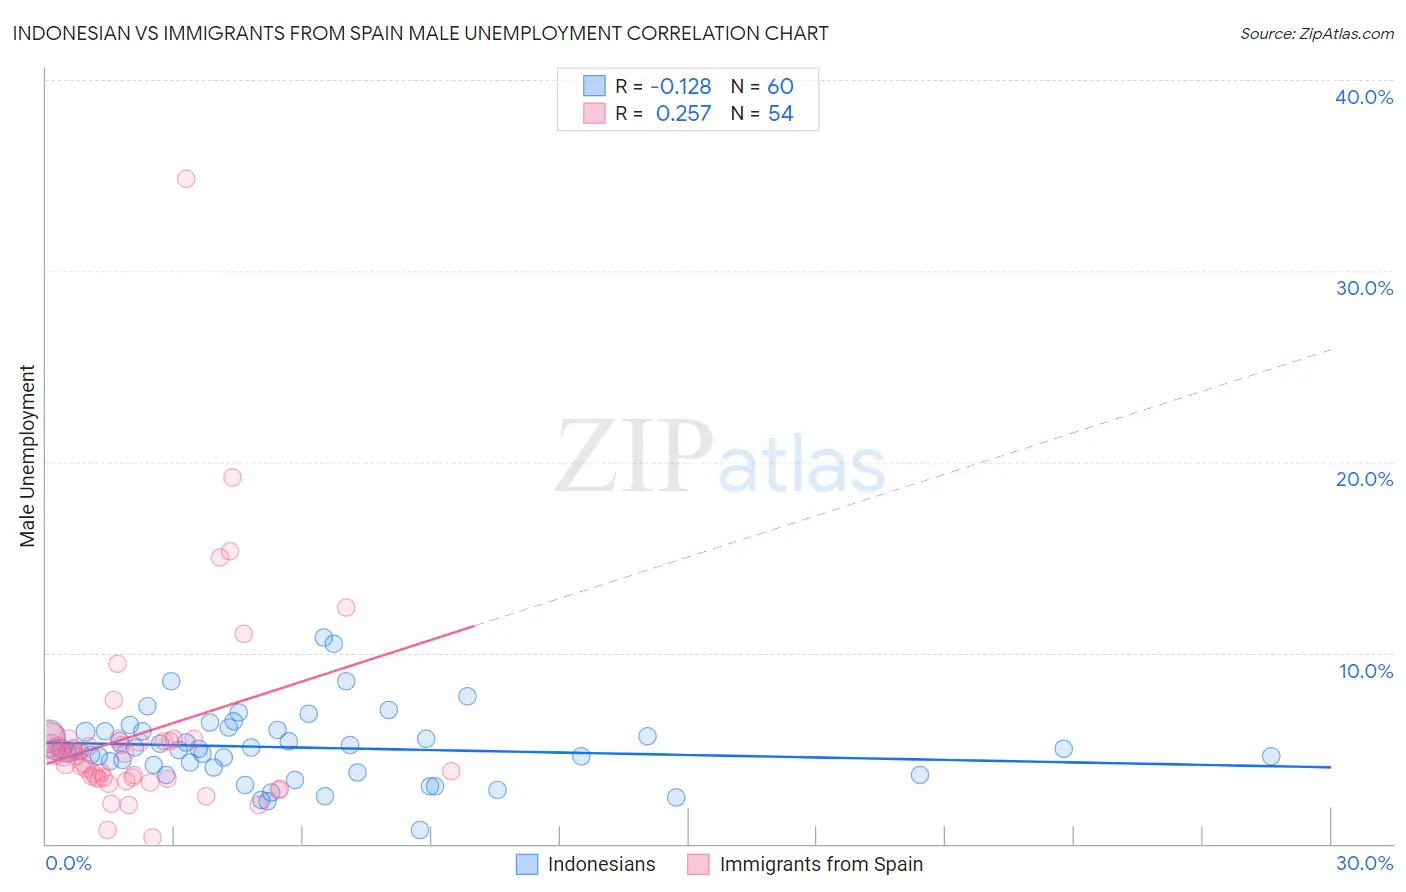 Indonesian vs Immigrants from Spain Male Unemployment